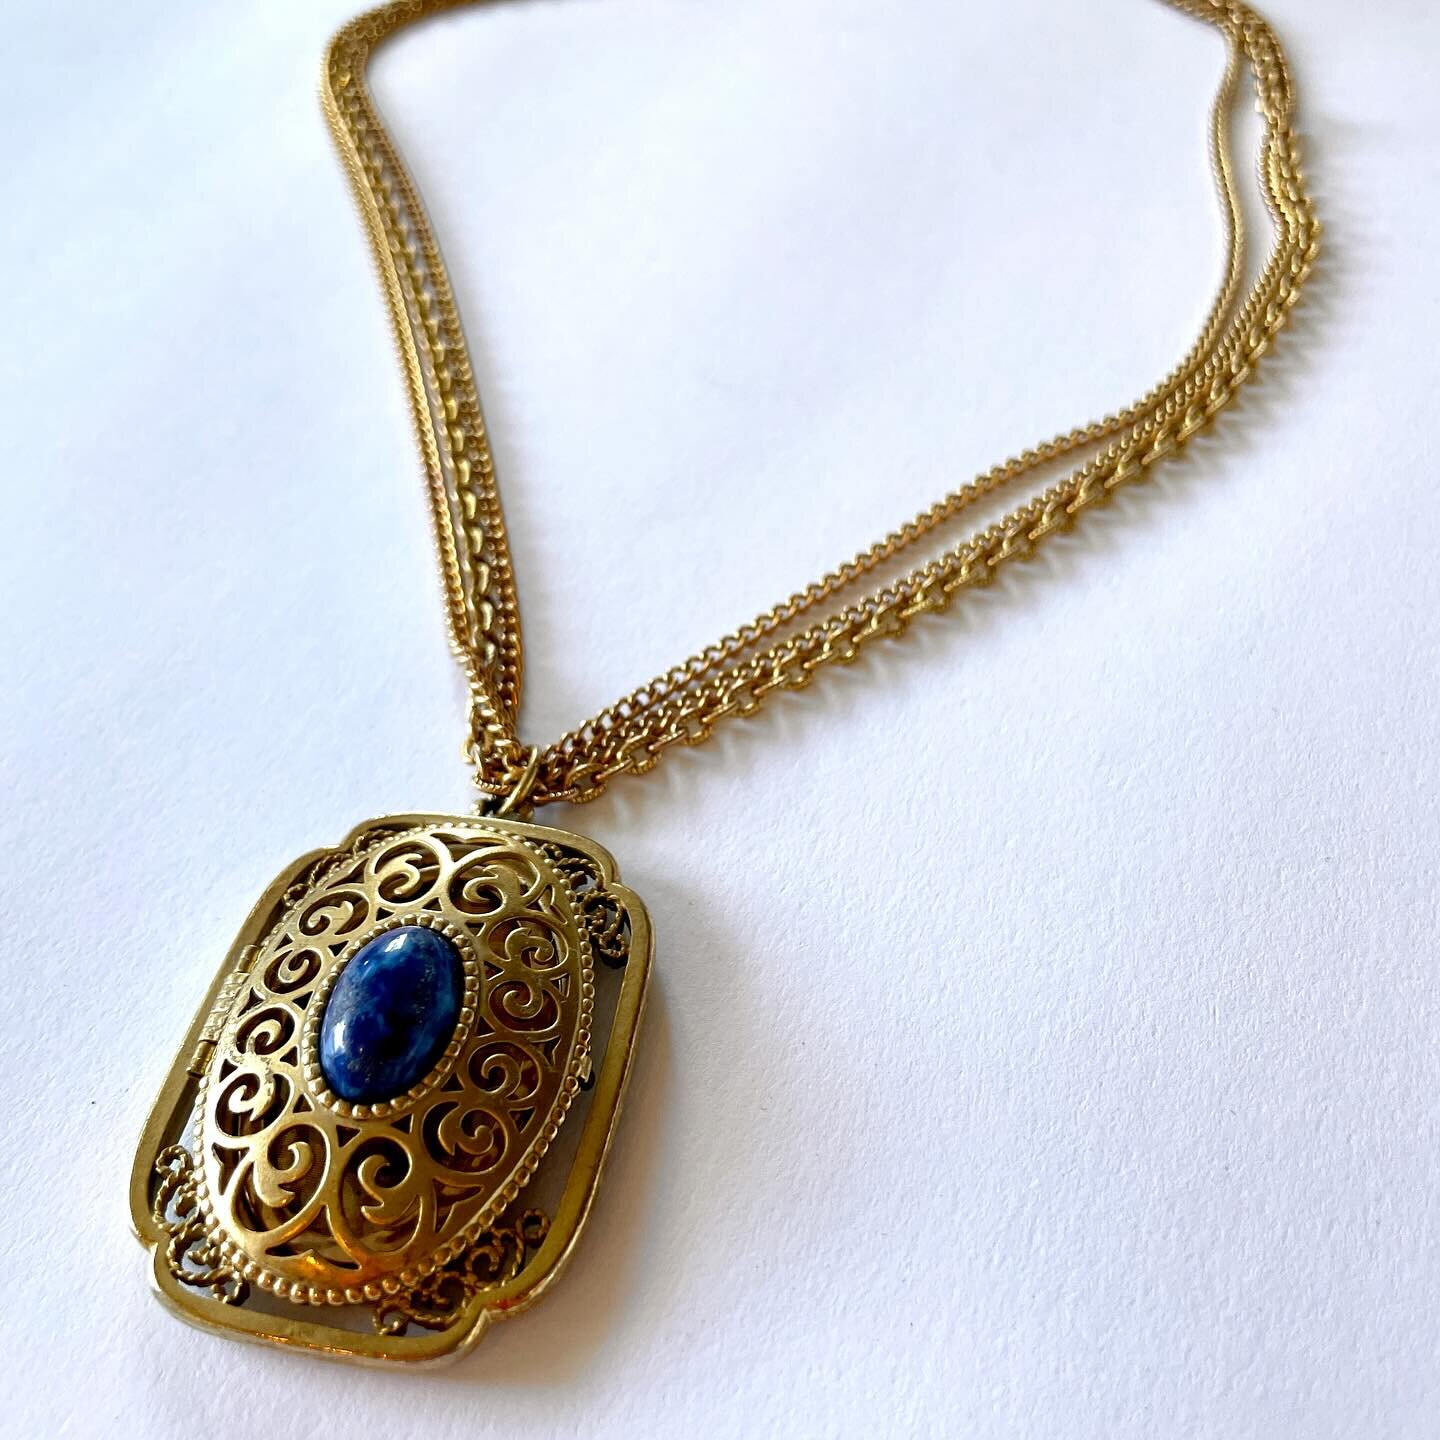 How cool is this 1970s perfume locket?! A clever Avon product designed to open and hold a scent-soaked pad so its fragrance is diffused through the filigree metal face, embellished with a deep blue cabochen 💙 You could also just stick a photo in the